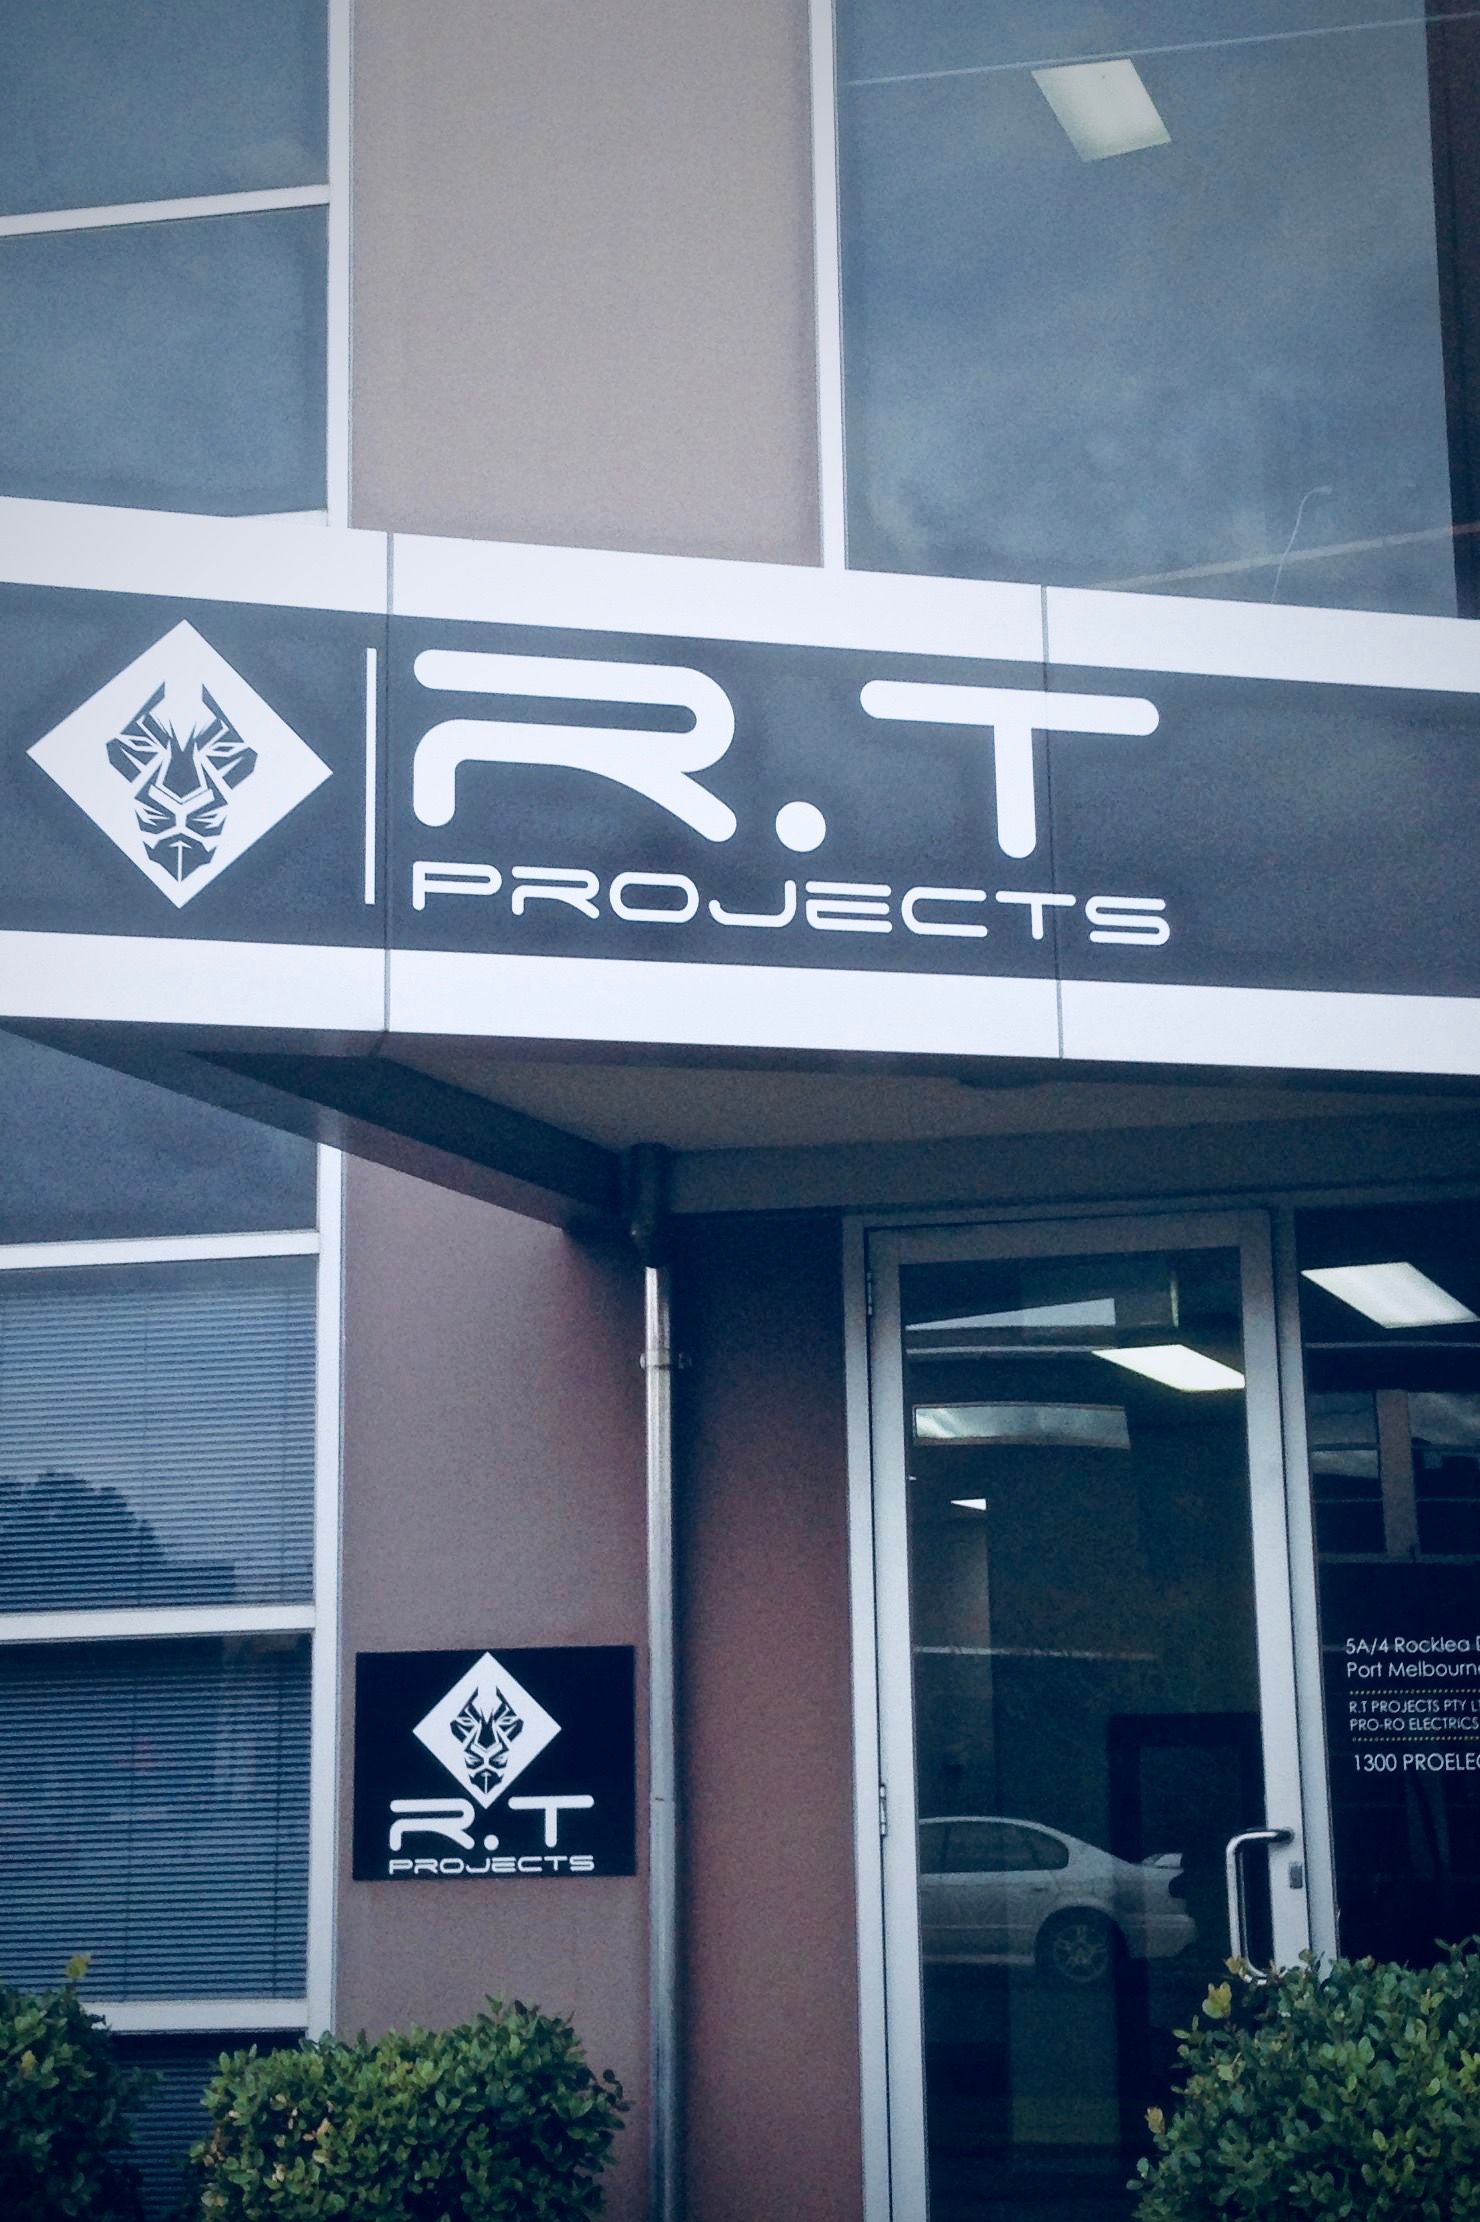 R.T Projects